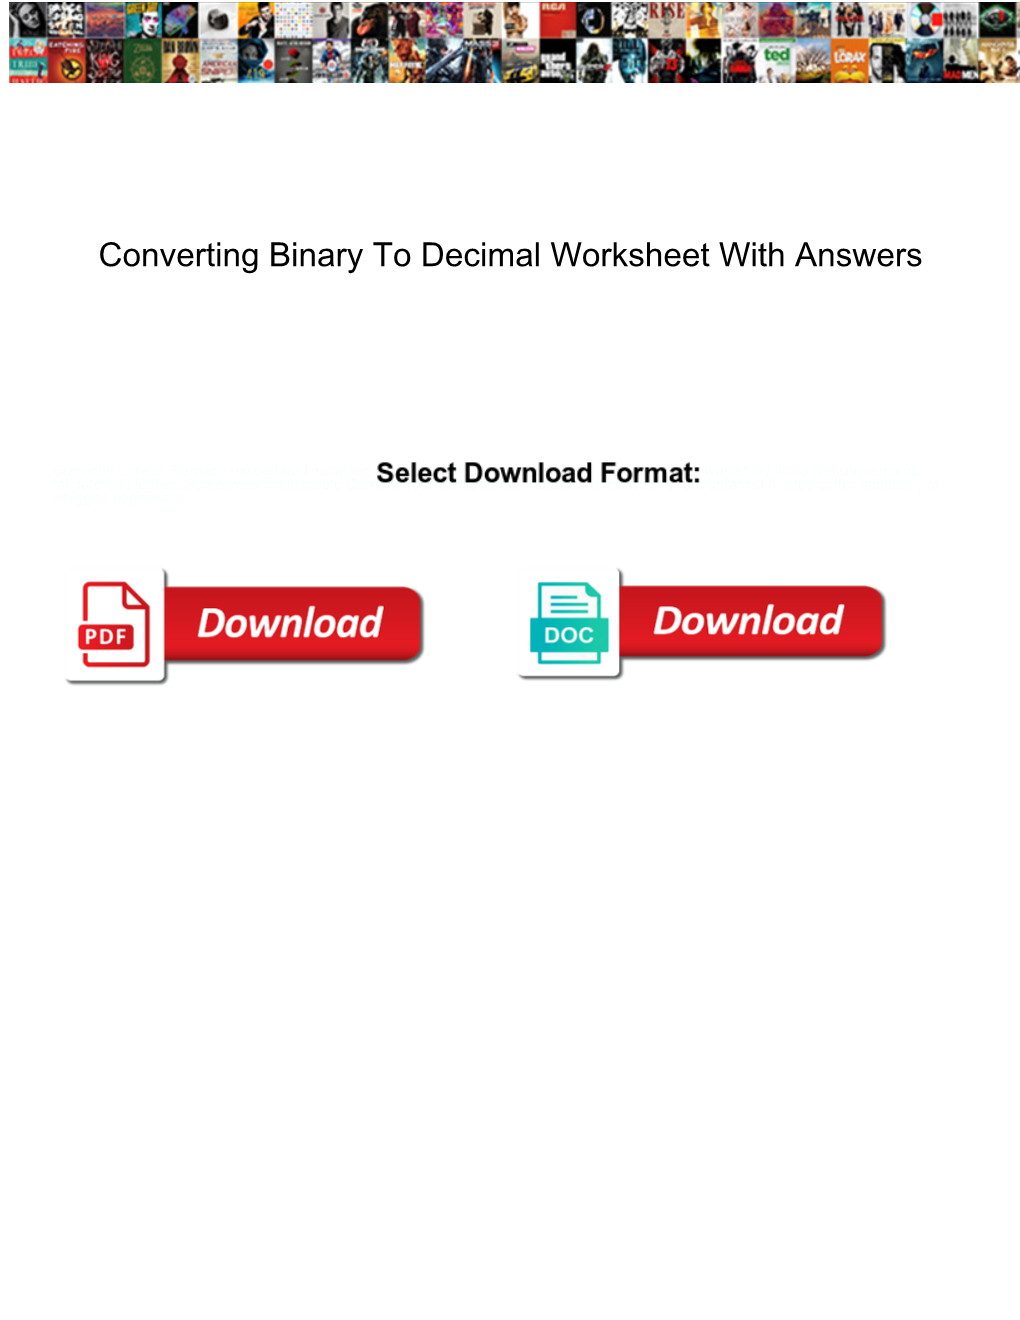 converting-binary-to-decimal-worksheet-with-answers-docslib